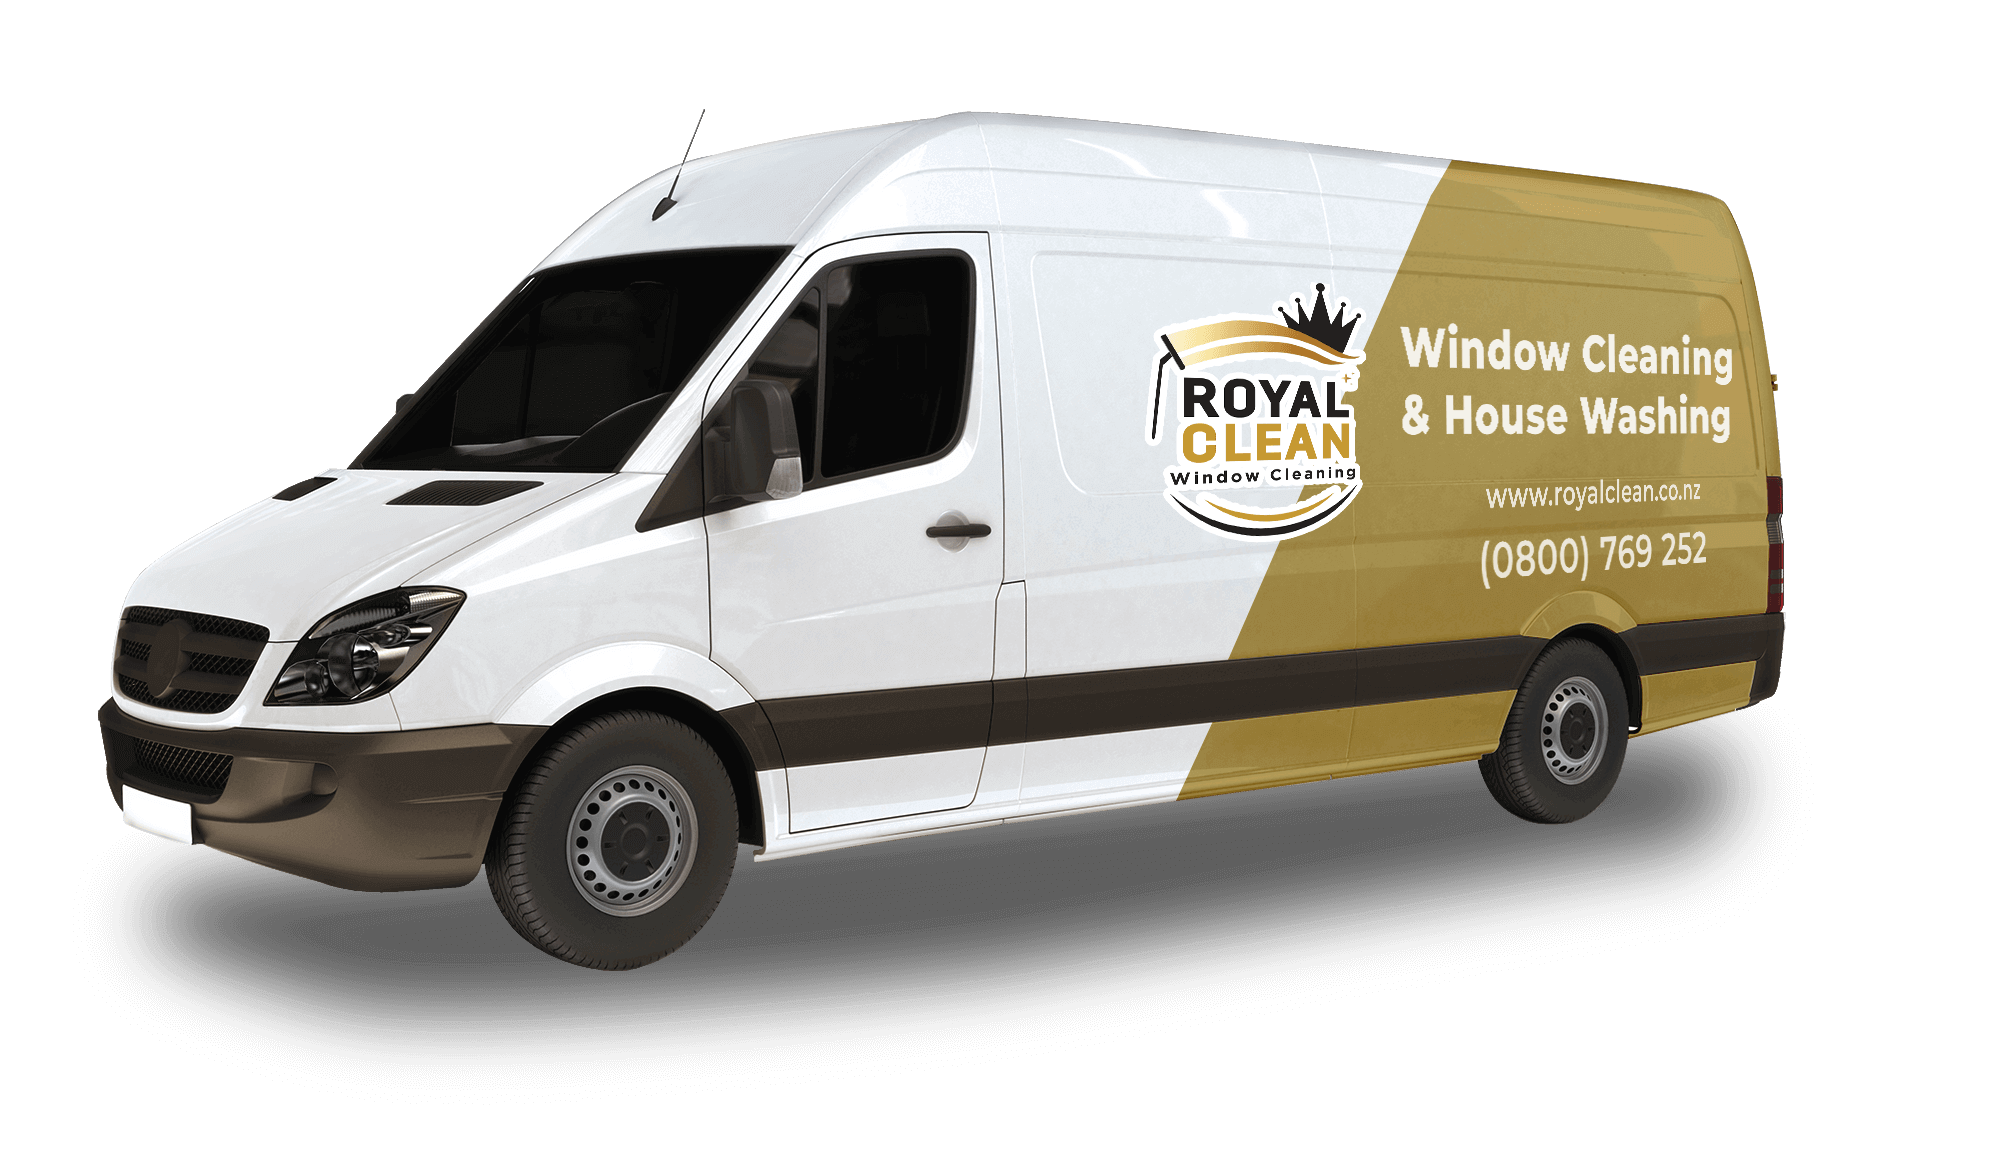 Royal Clean Window Cleaning and House Washing Van 1